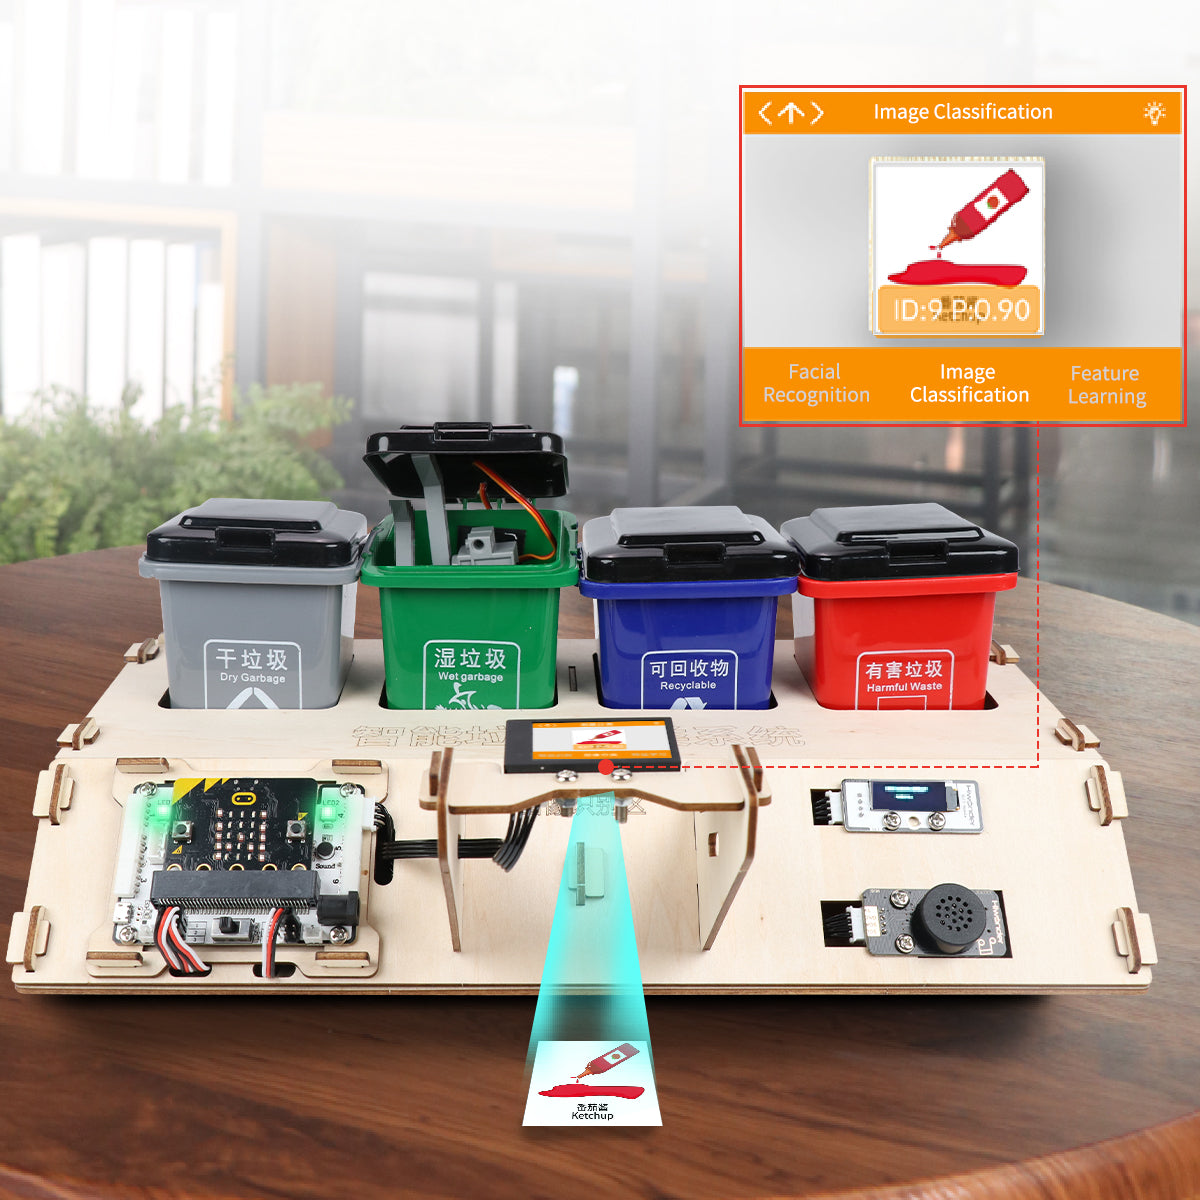 Waste Sorting Robot Kit: Hiwonder AI Vision Waste Classification Kit with Audio Broadcast Powered by micro:bit